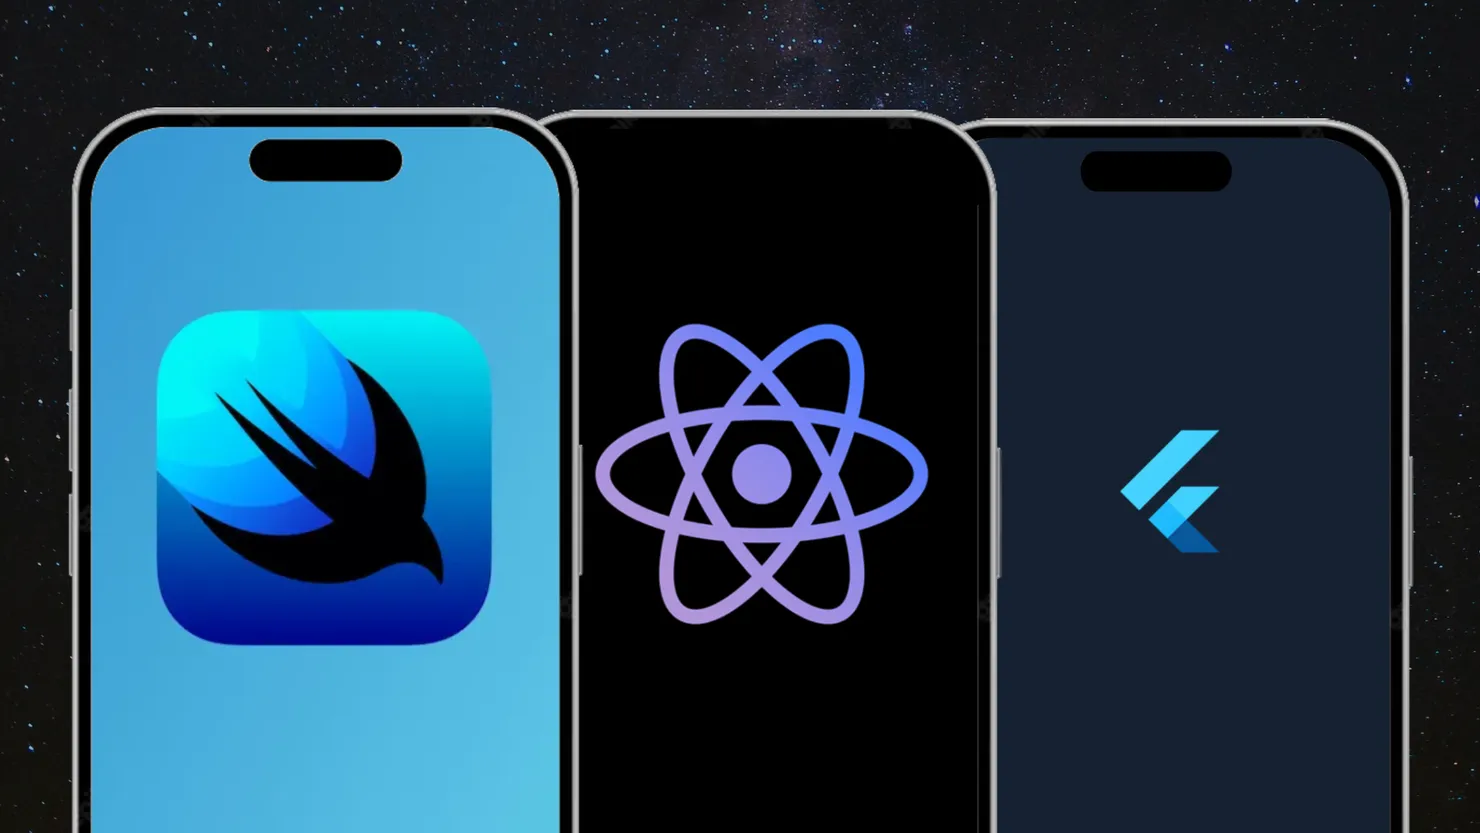 3 iPhones with SwiftUI, React Native, and Flutter logos